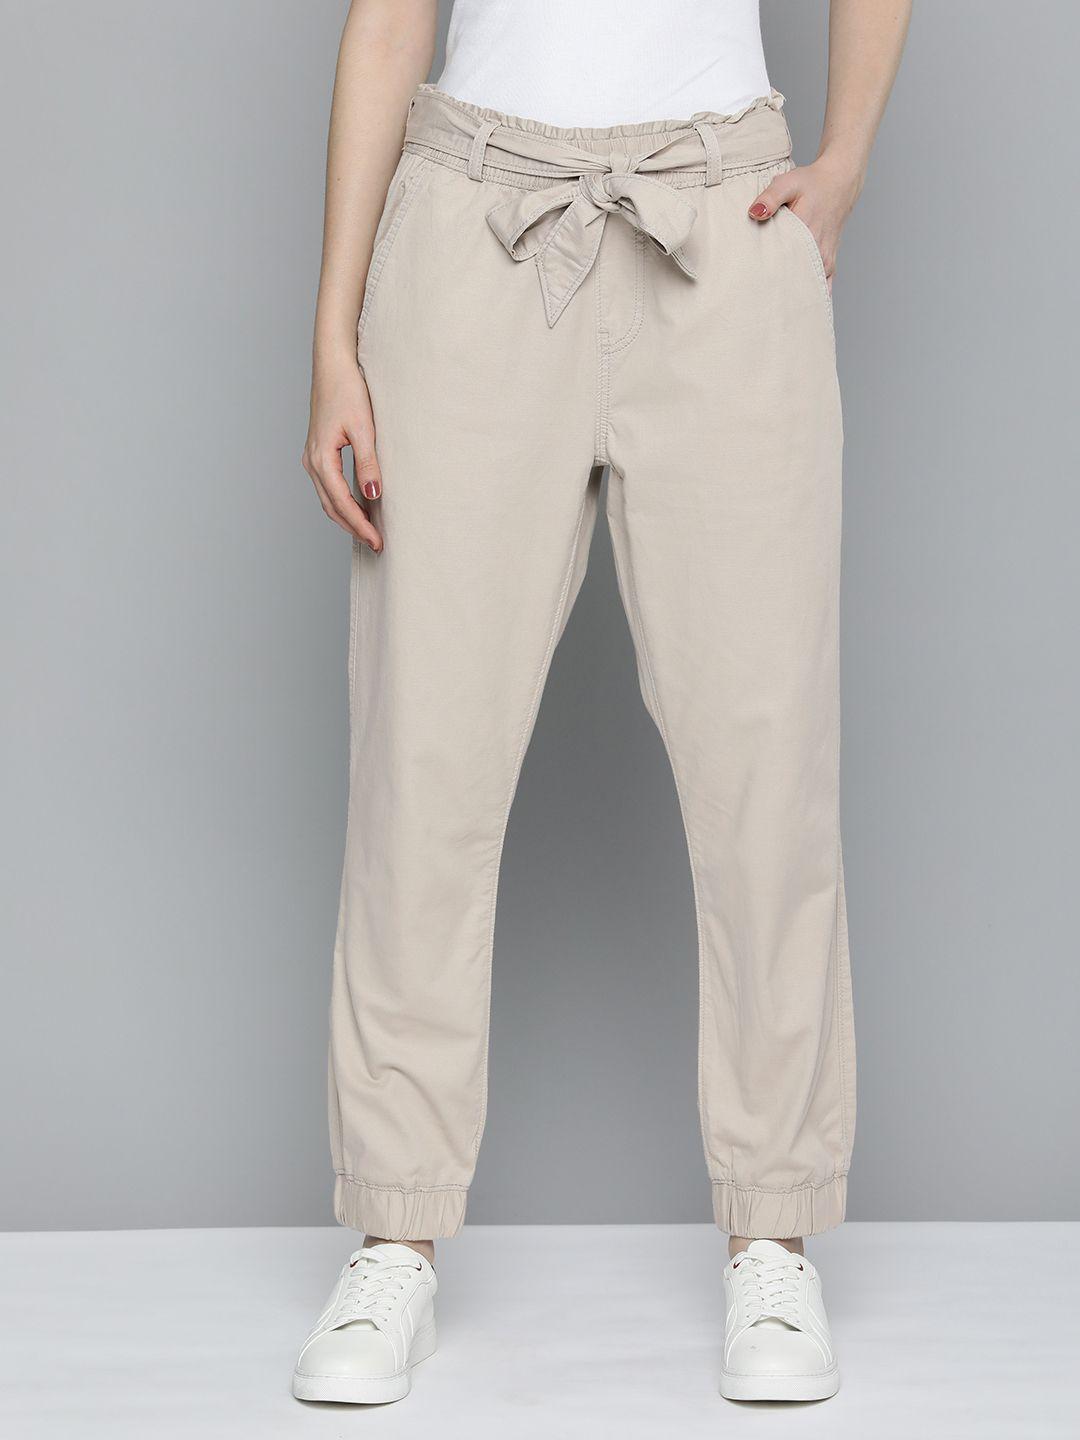 Levis Women High Rise Joggers Trousers Comes With A Fabric Belt